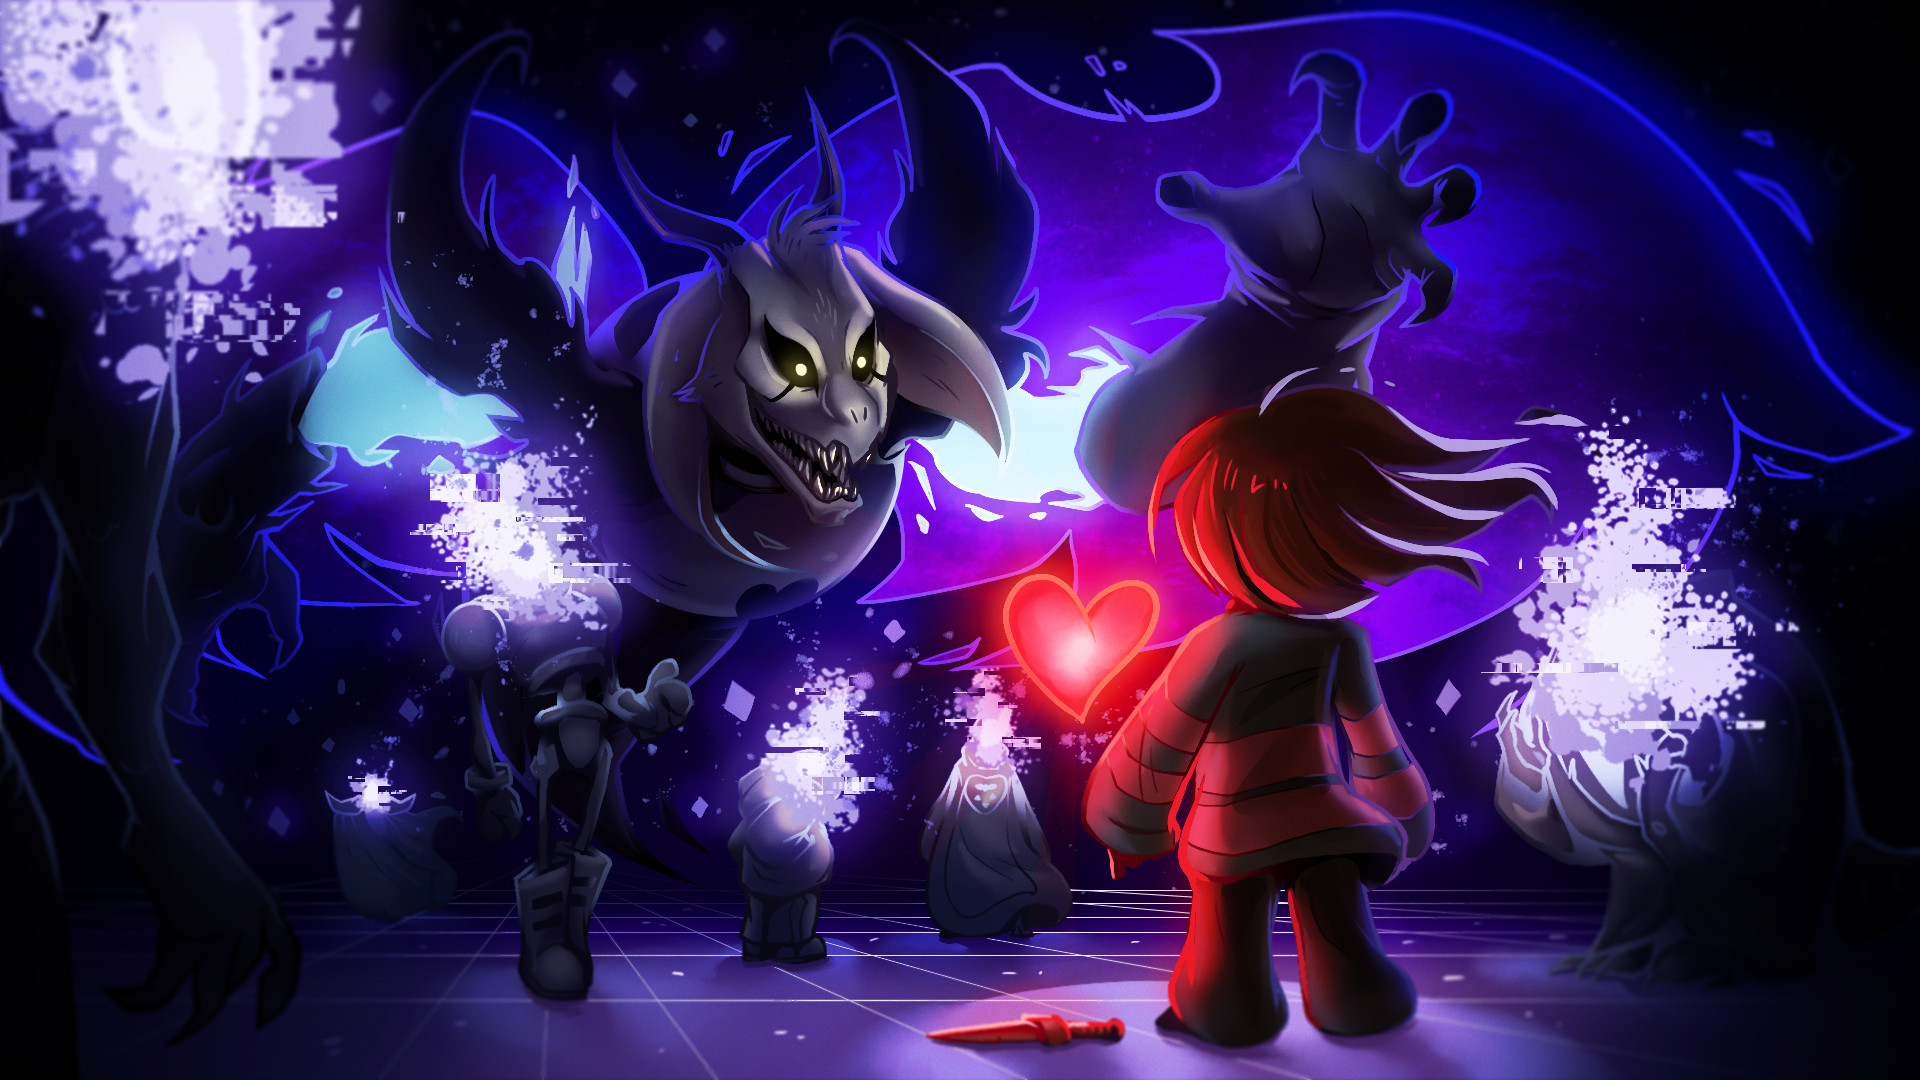 Undertale Wallpapers boss battles of genocide, neutral, and pacifist endings